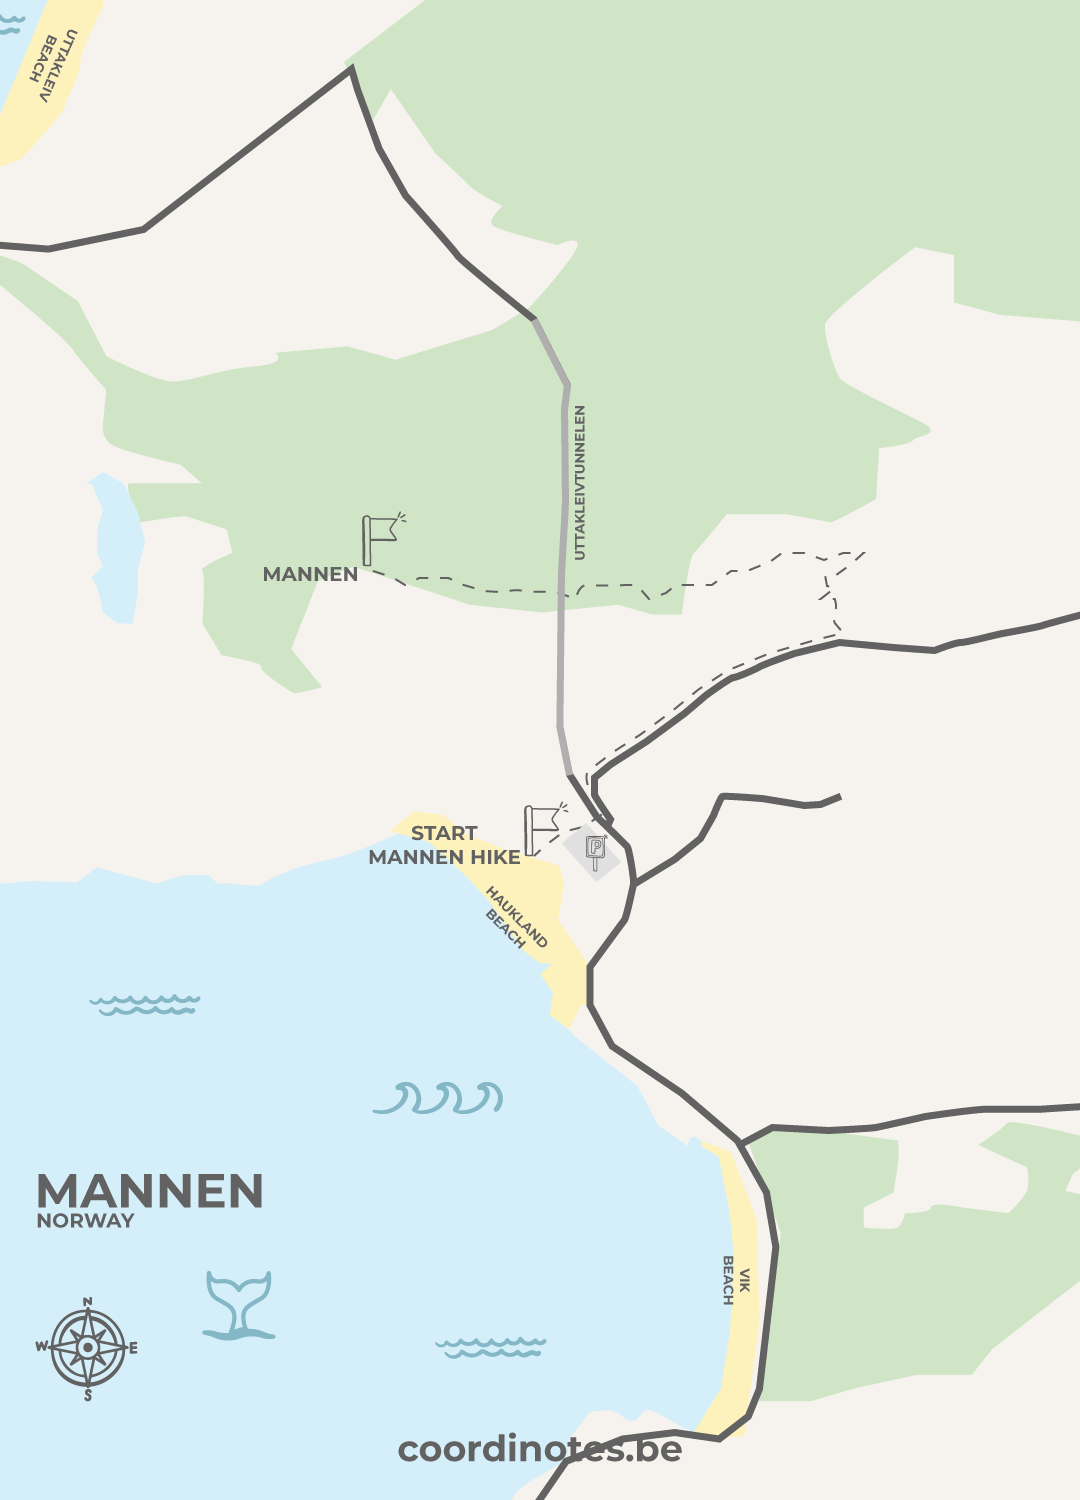 Map about Mannen Hike